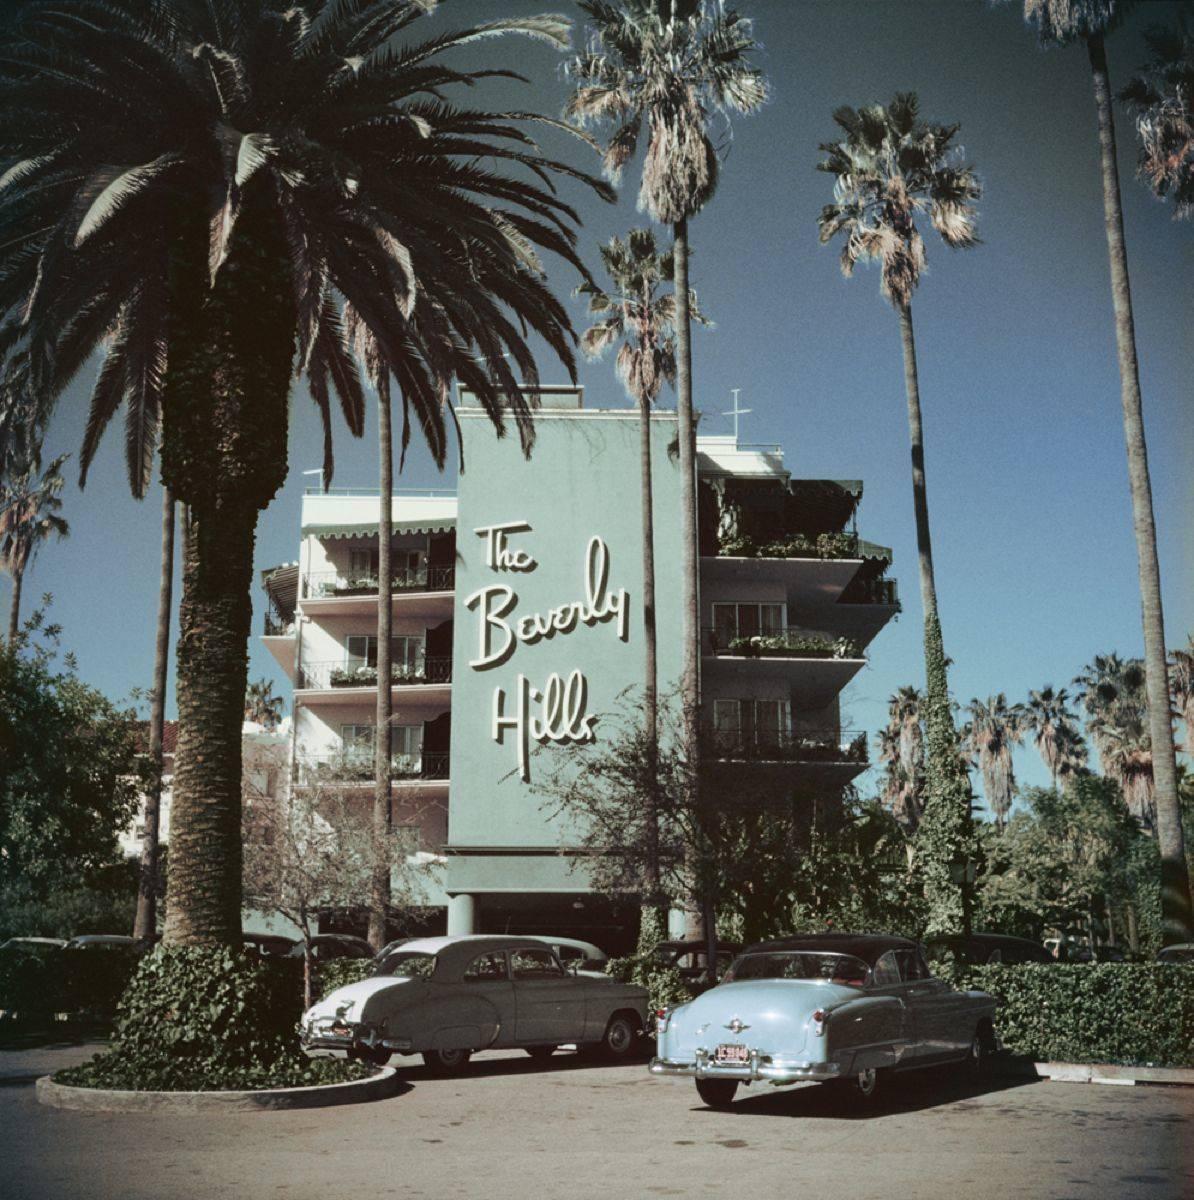 Slim Aarons Figurative Photograph - 'Beverly Hills Hotel' (Archival Pigment Print)